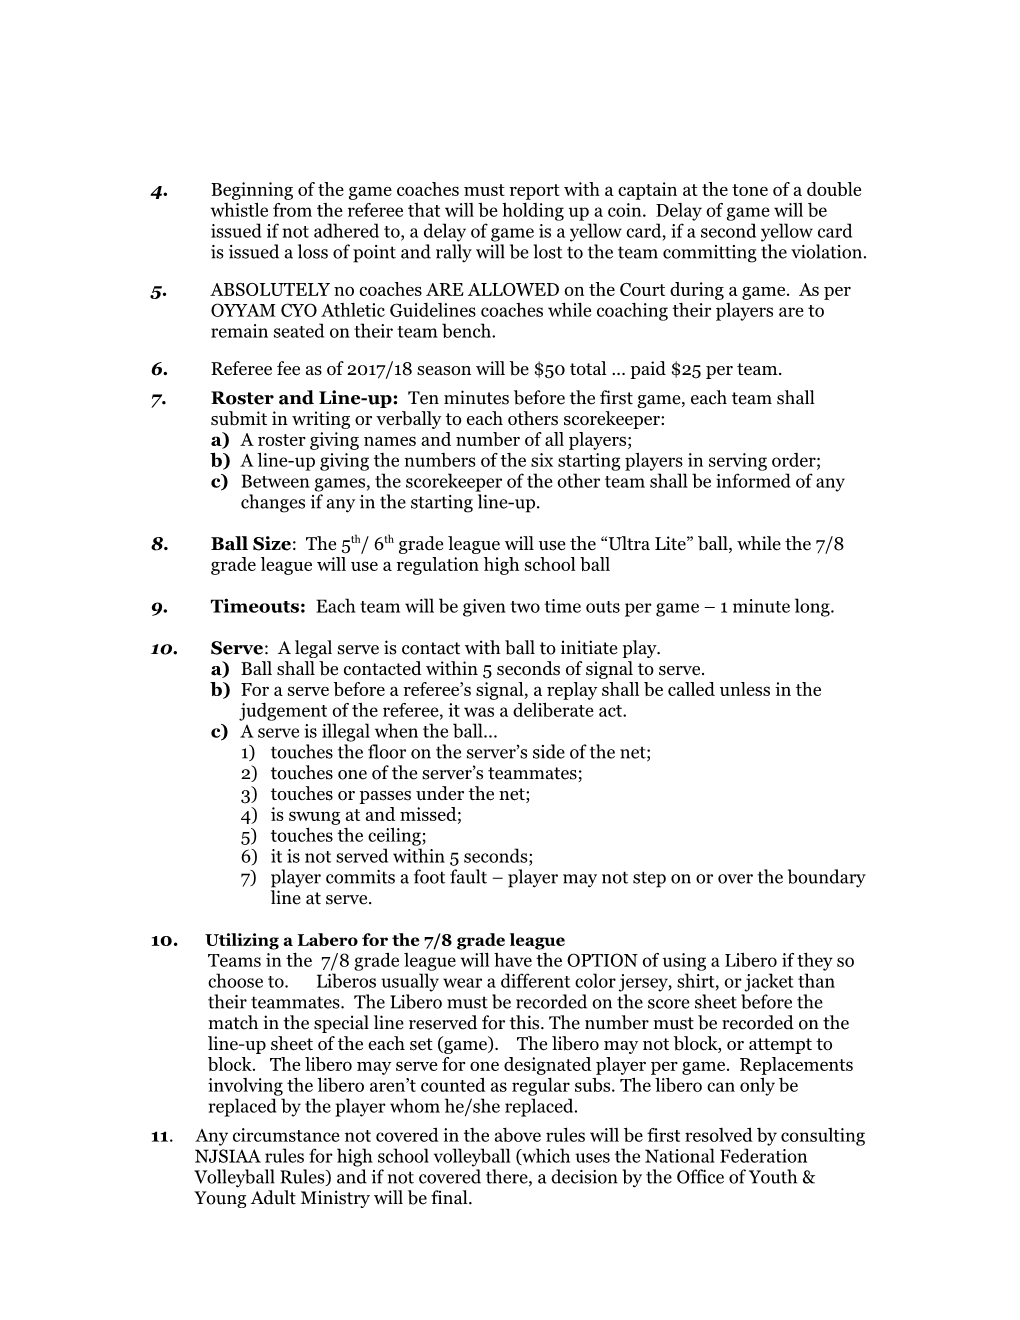 CYO Girls VOLLEYBALL SPECIFIC RULES